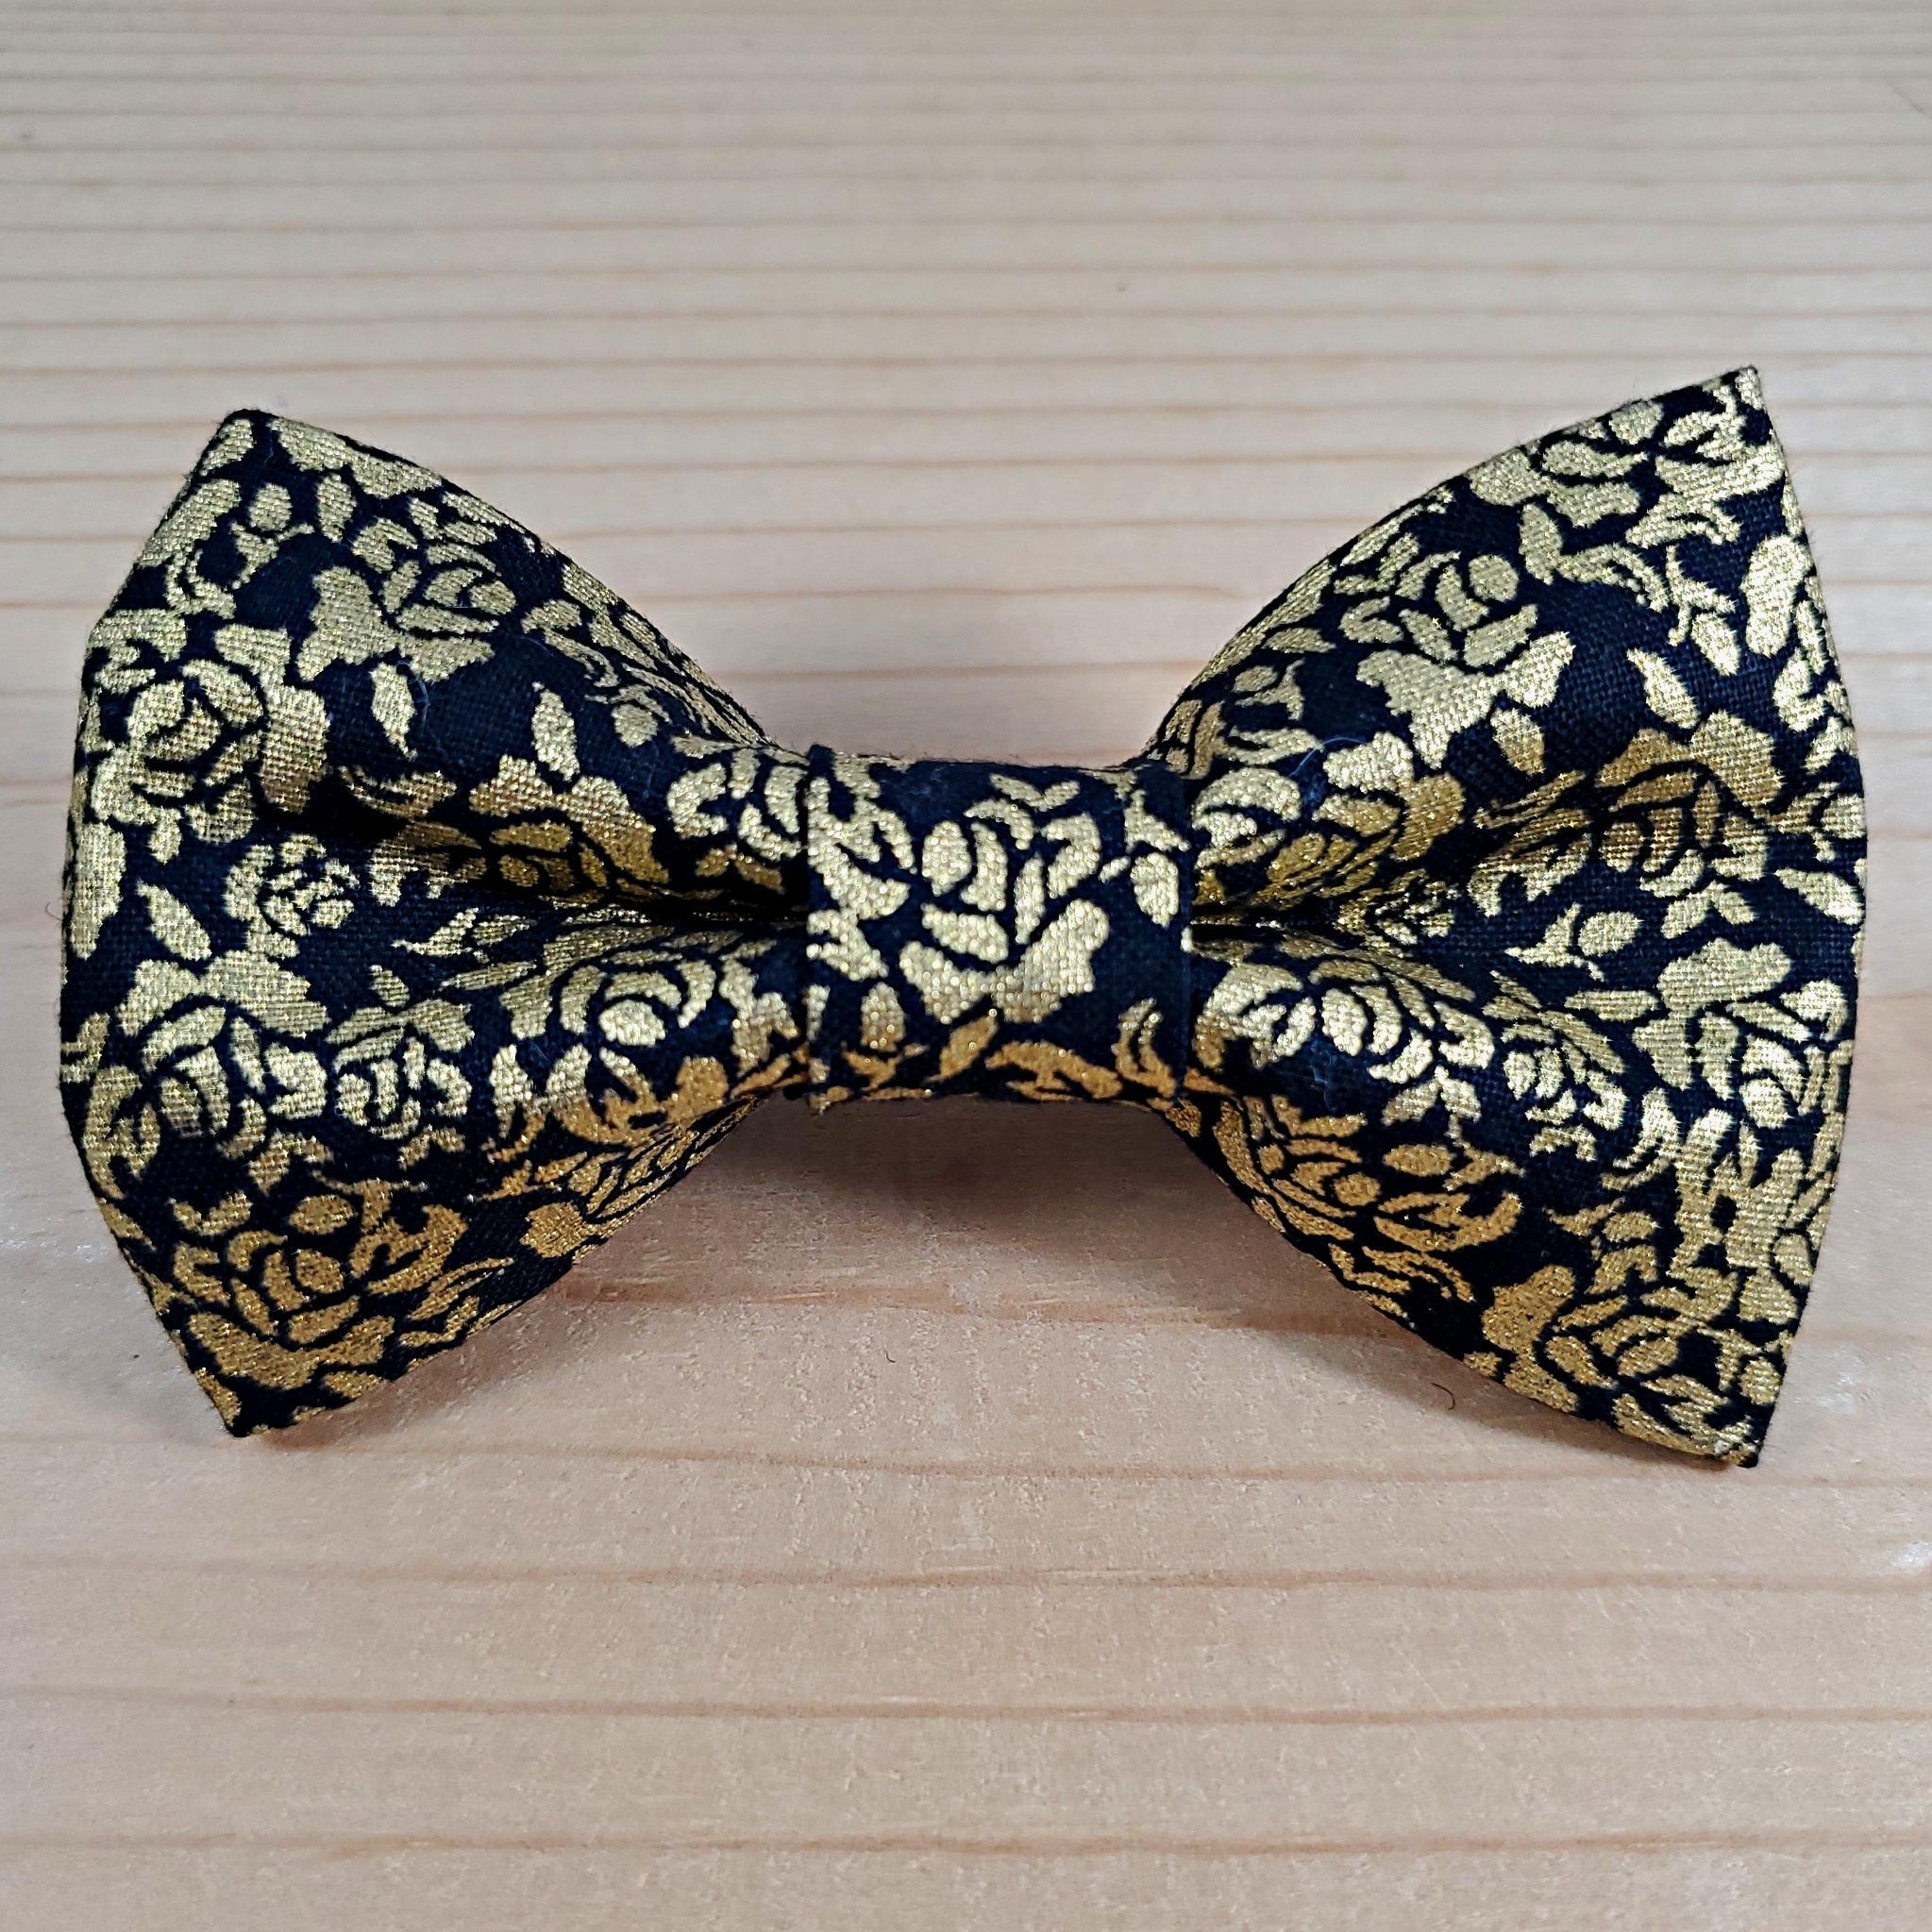 Gold and Black Floral